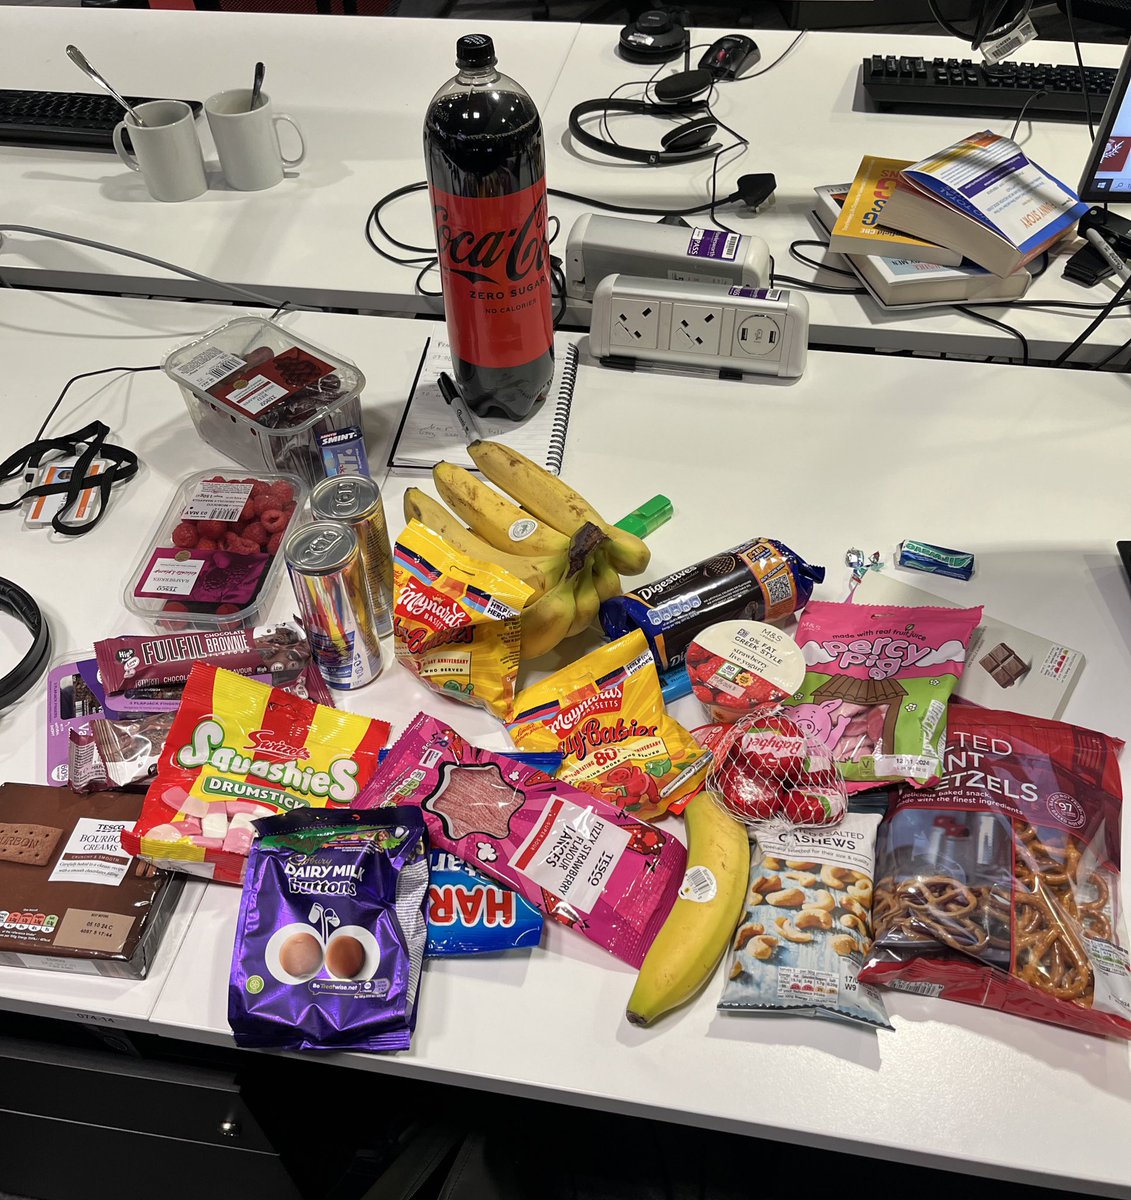 Political snack teams assemble. This is mine @MattChorley and @CalumAM’s haul for the night, let’s see what you’ve got …